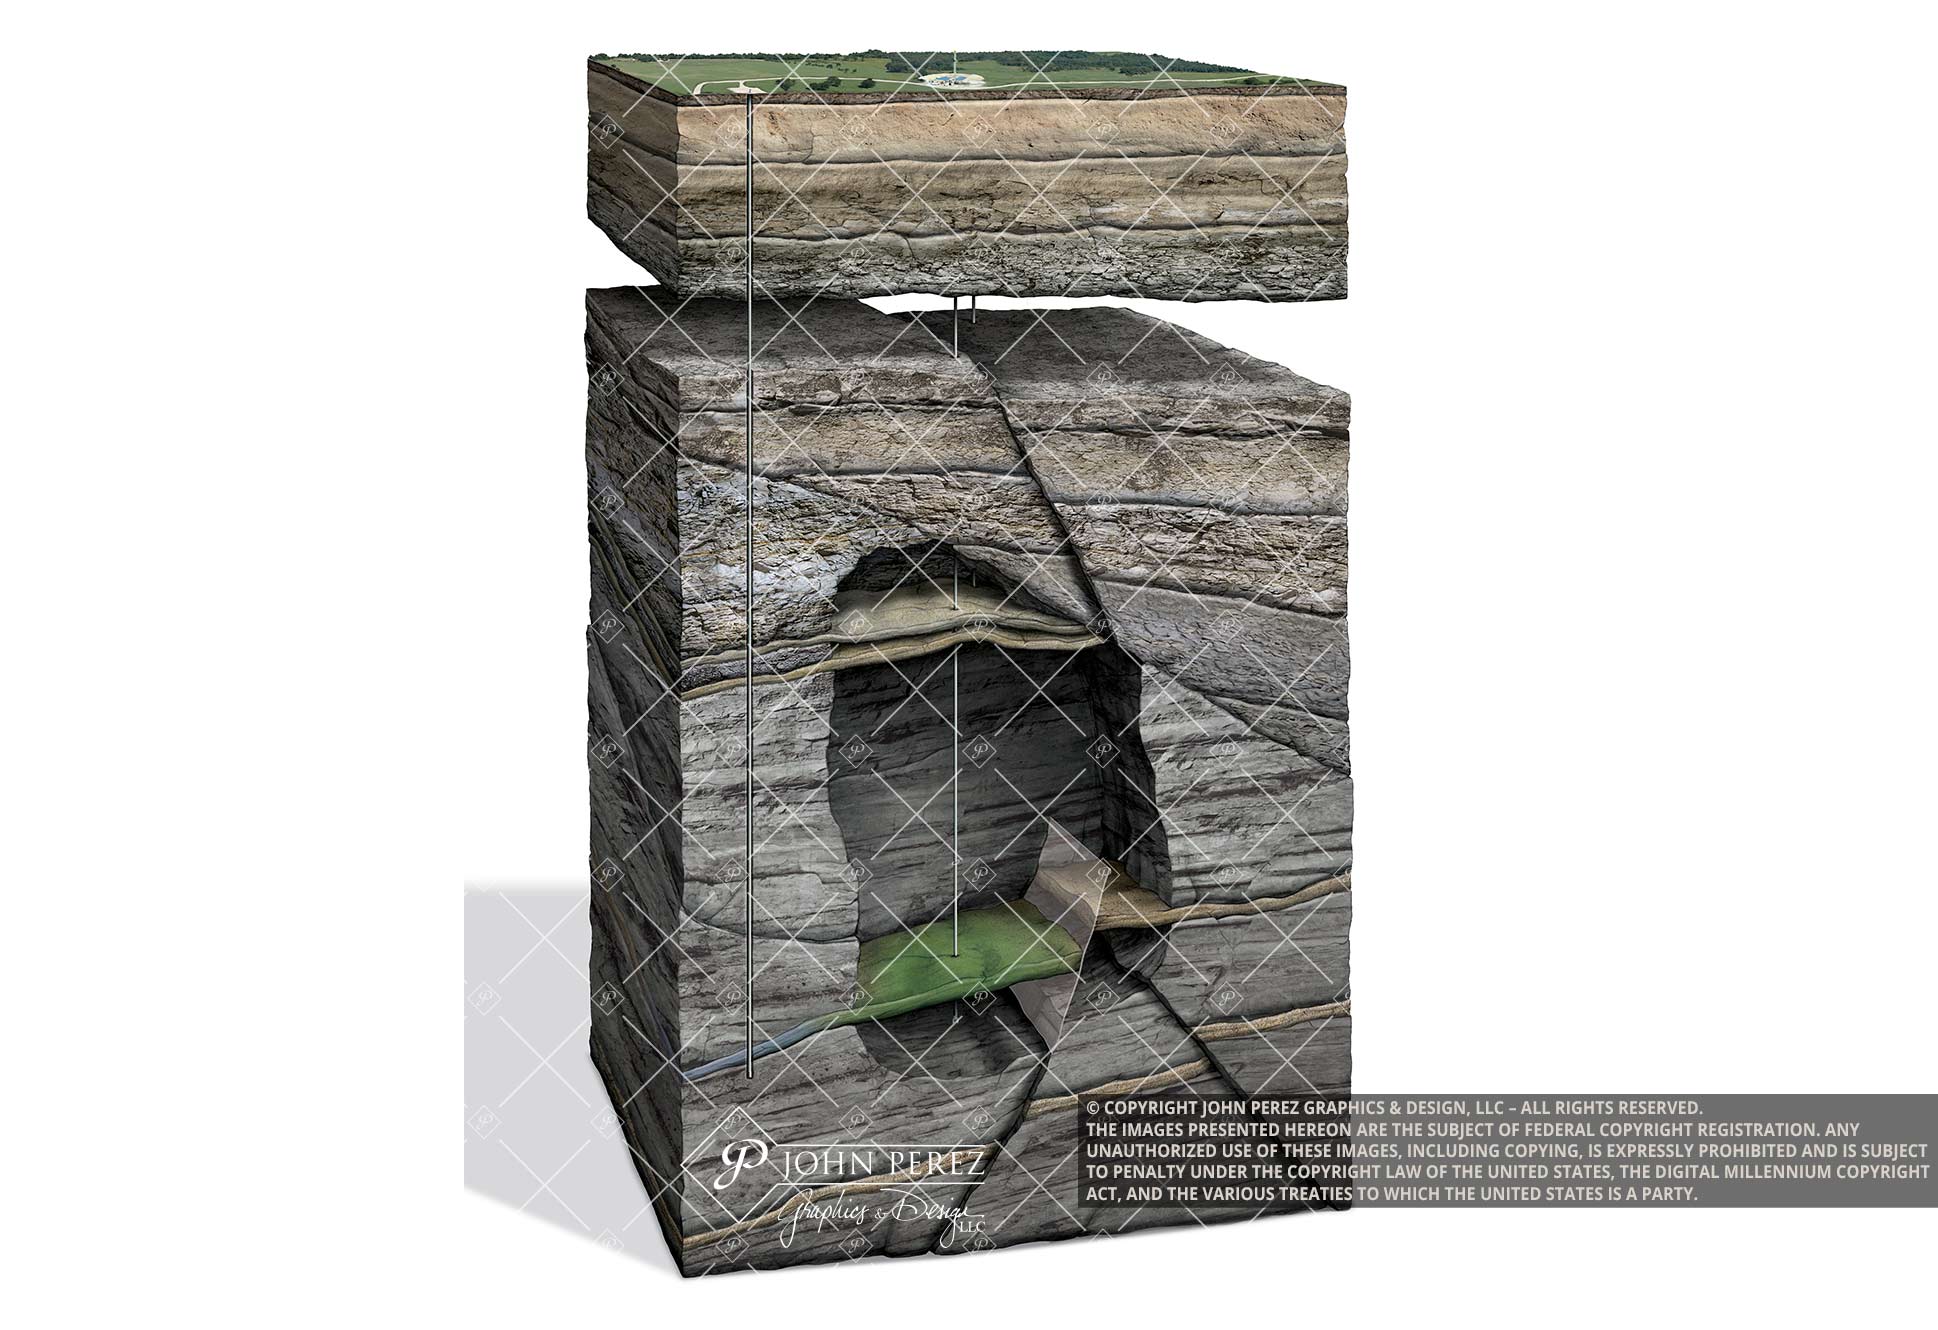 Faulted Sandstone Oil Water Illustration, oil water graphic, petroleum art, fault trap